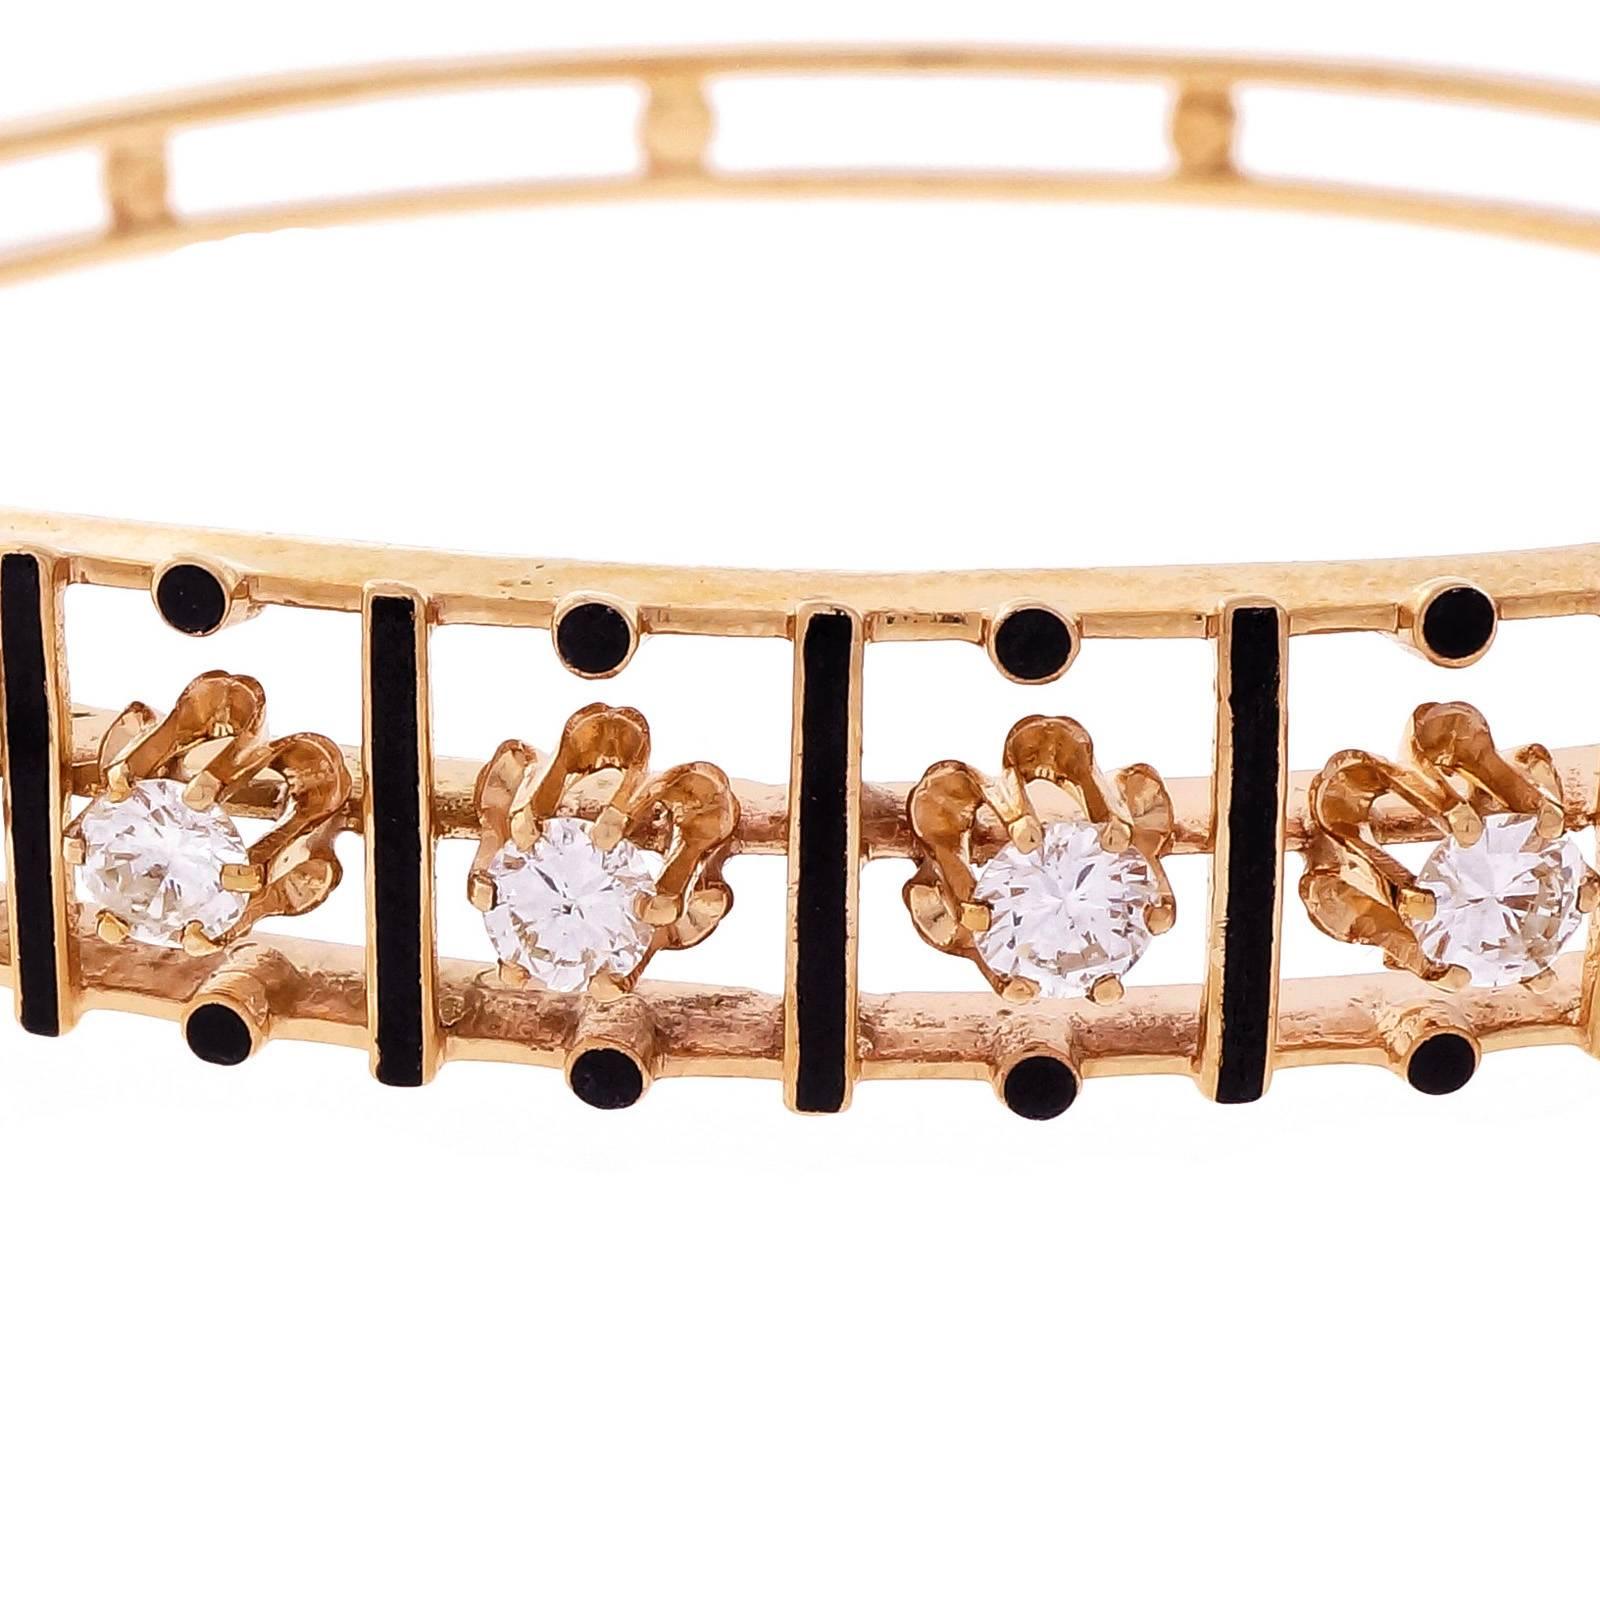 Hinged 1950 14k yellow gold diamond bangle bracelet signed RGJ. Distinctive black enamel and bright diamonds.

7 round diamonds, approx. total weight 1.00cts, H, VS2 – SI1
14k yellow gold
Tested and stamped: 14k
Hallmark: RGJ
17.3 grams
Width